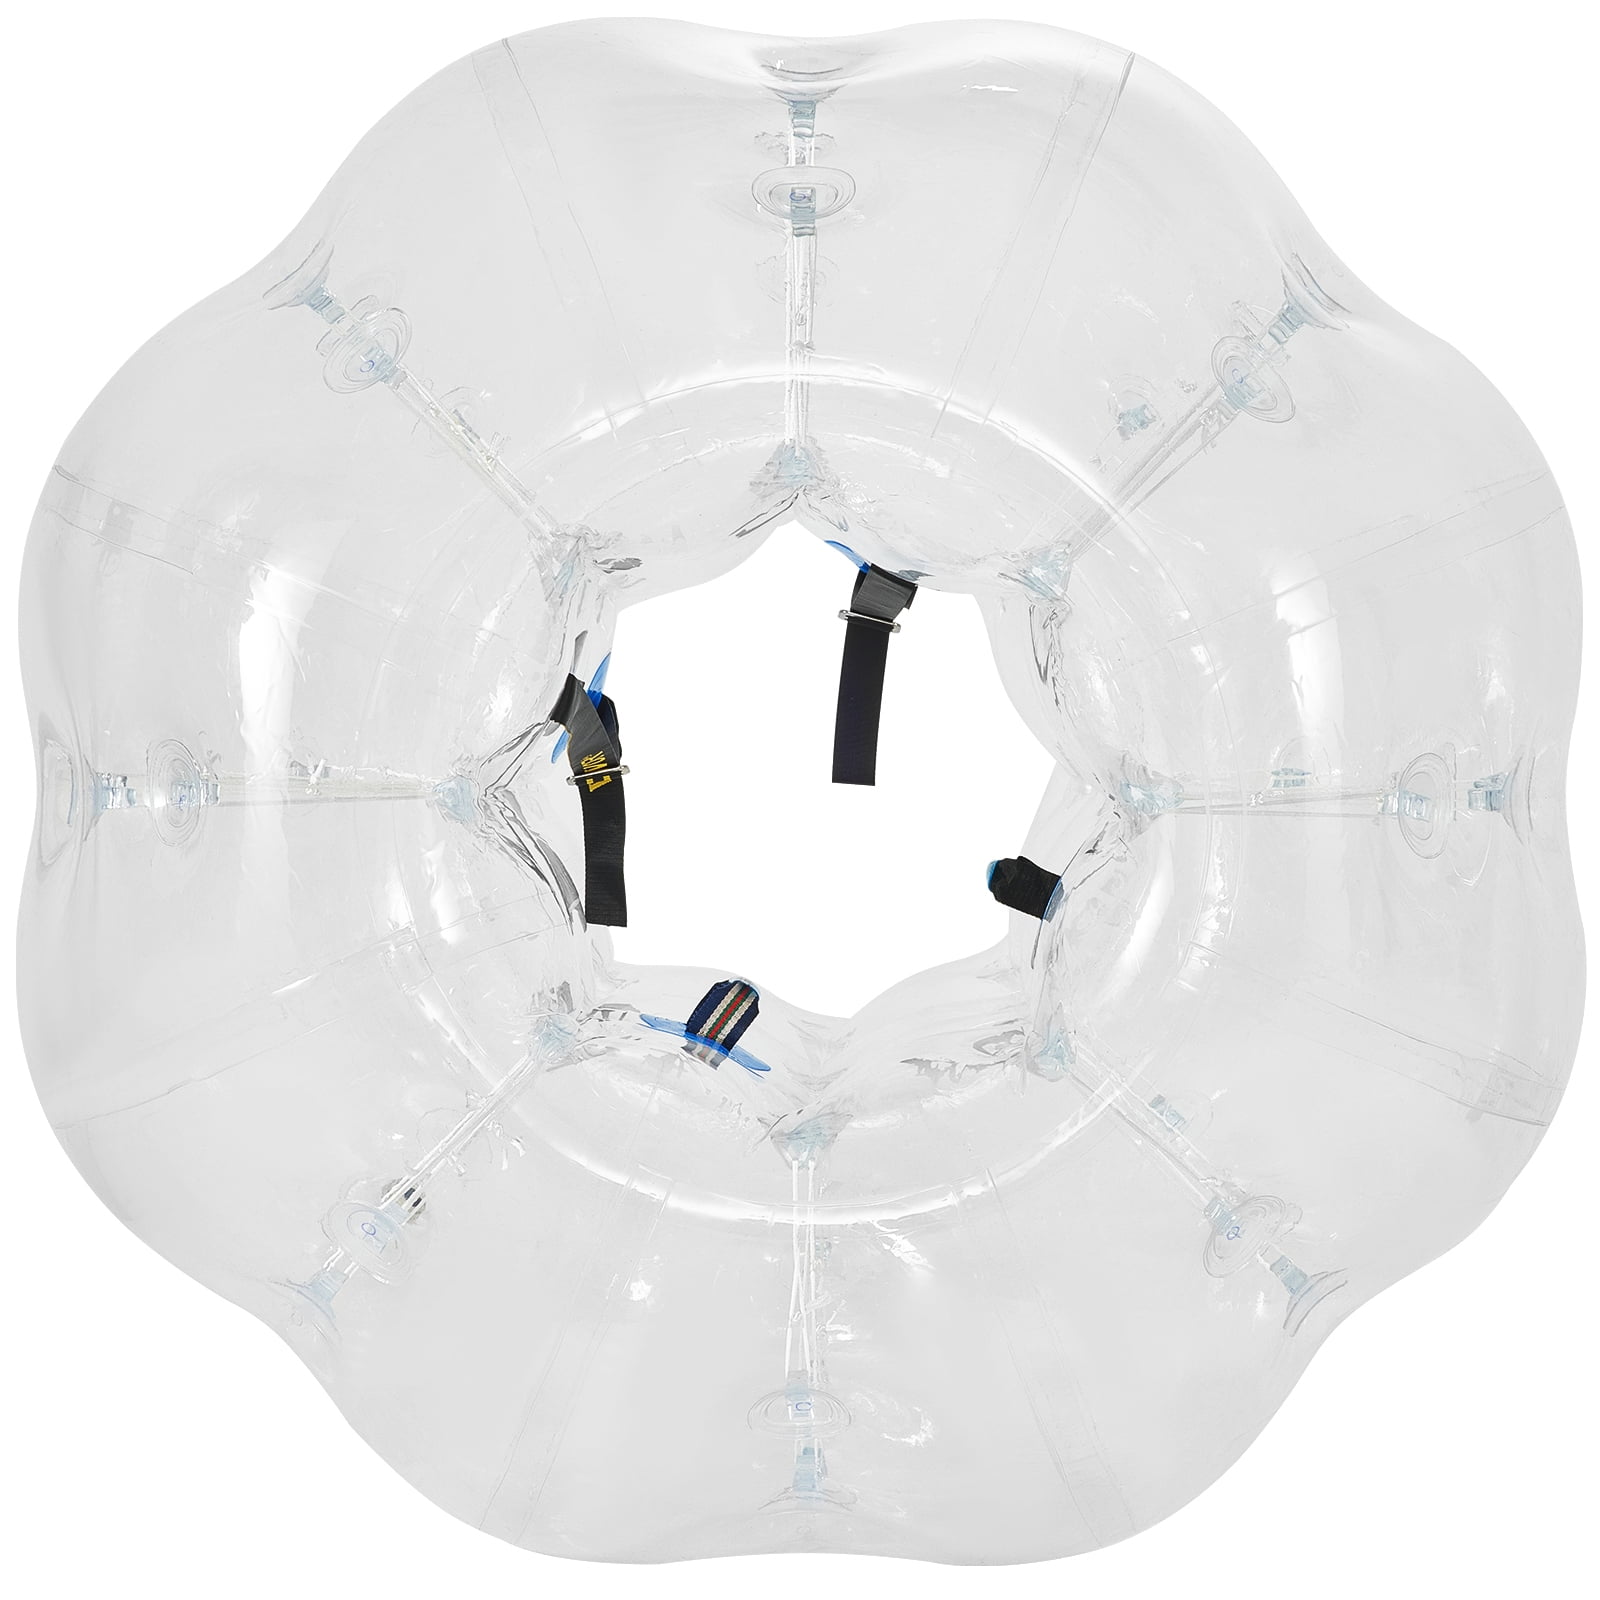 Zorb Football body bumper Suit full body costumes Body Inflatable bubble  Air Bumper transparent human bumper balls with dot